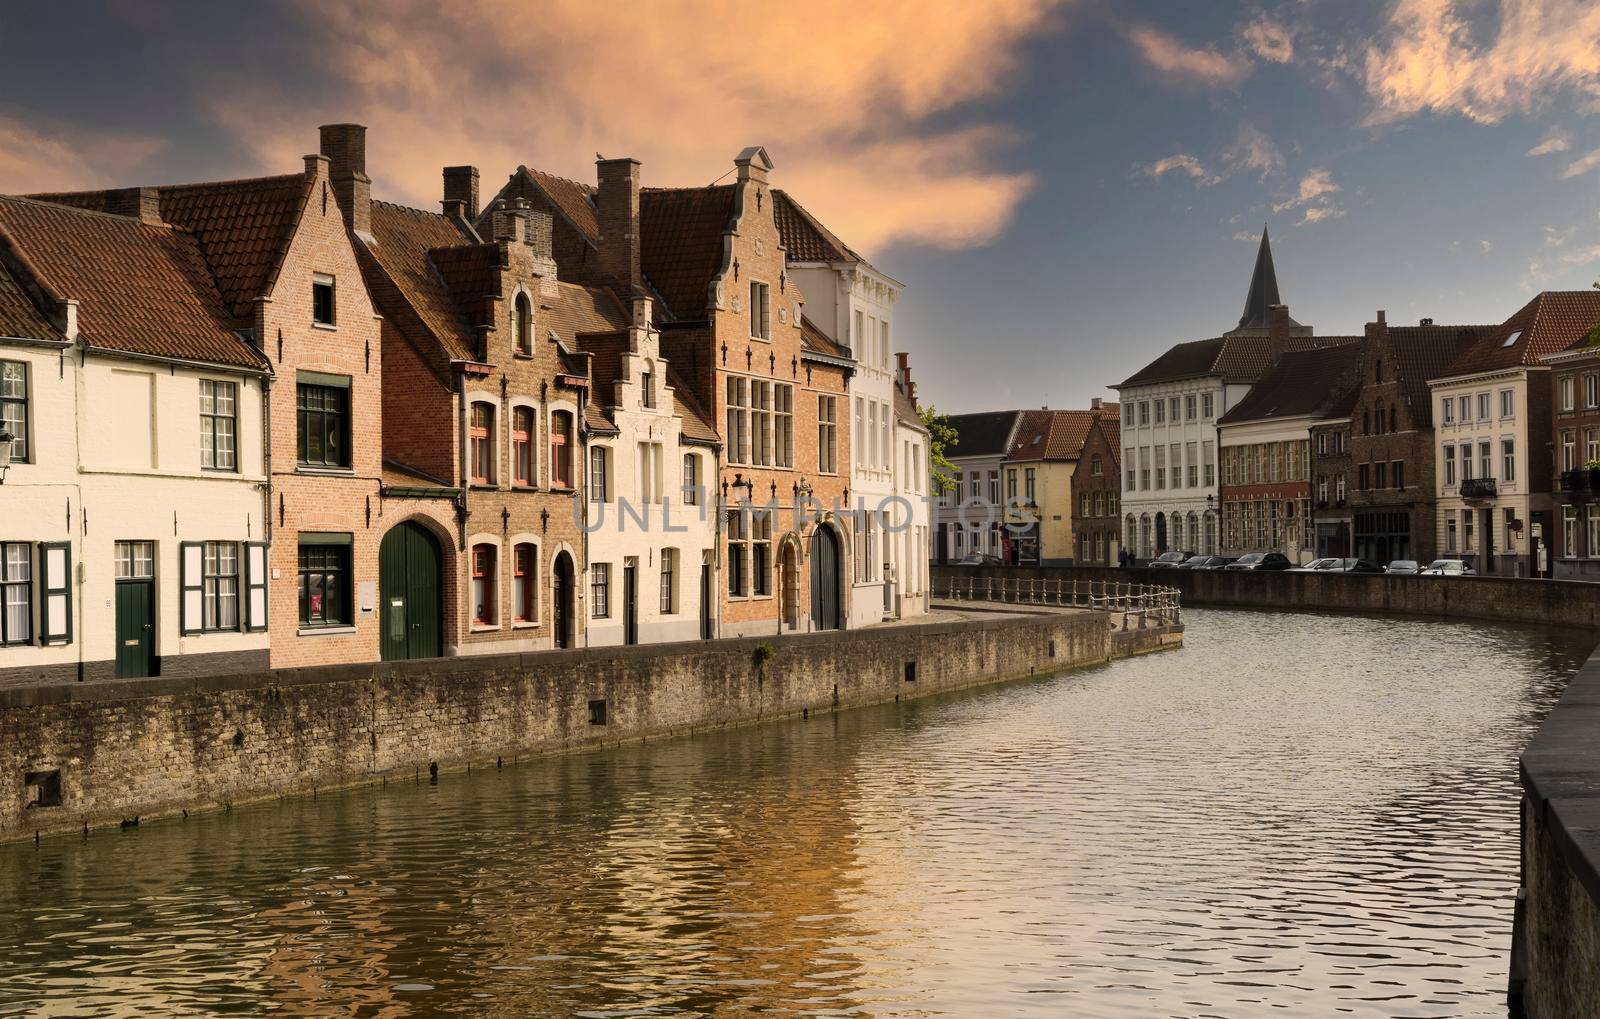 Street in the medieval Belgian city of Bruges at sunset and crossed by one of the canals.